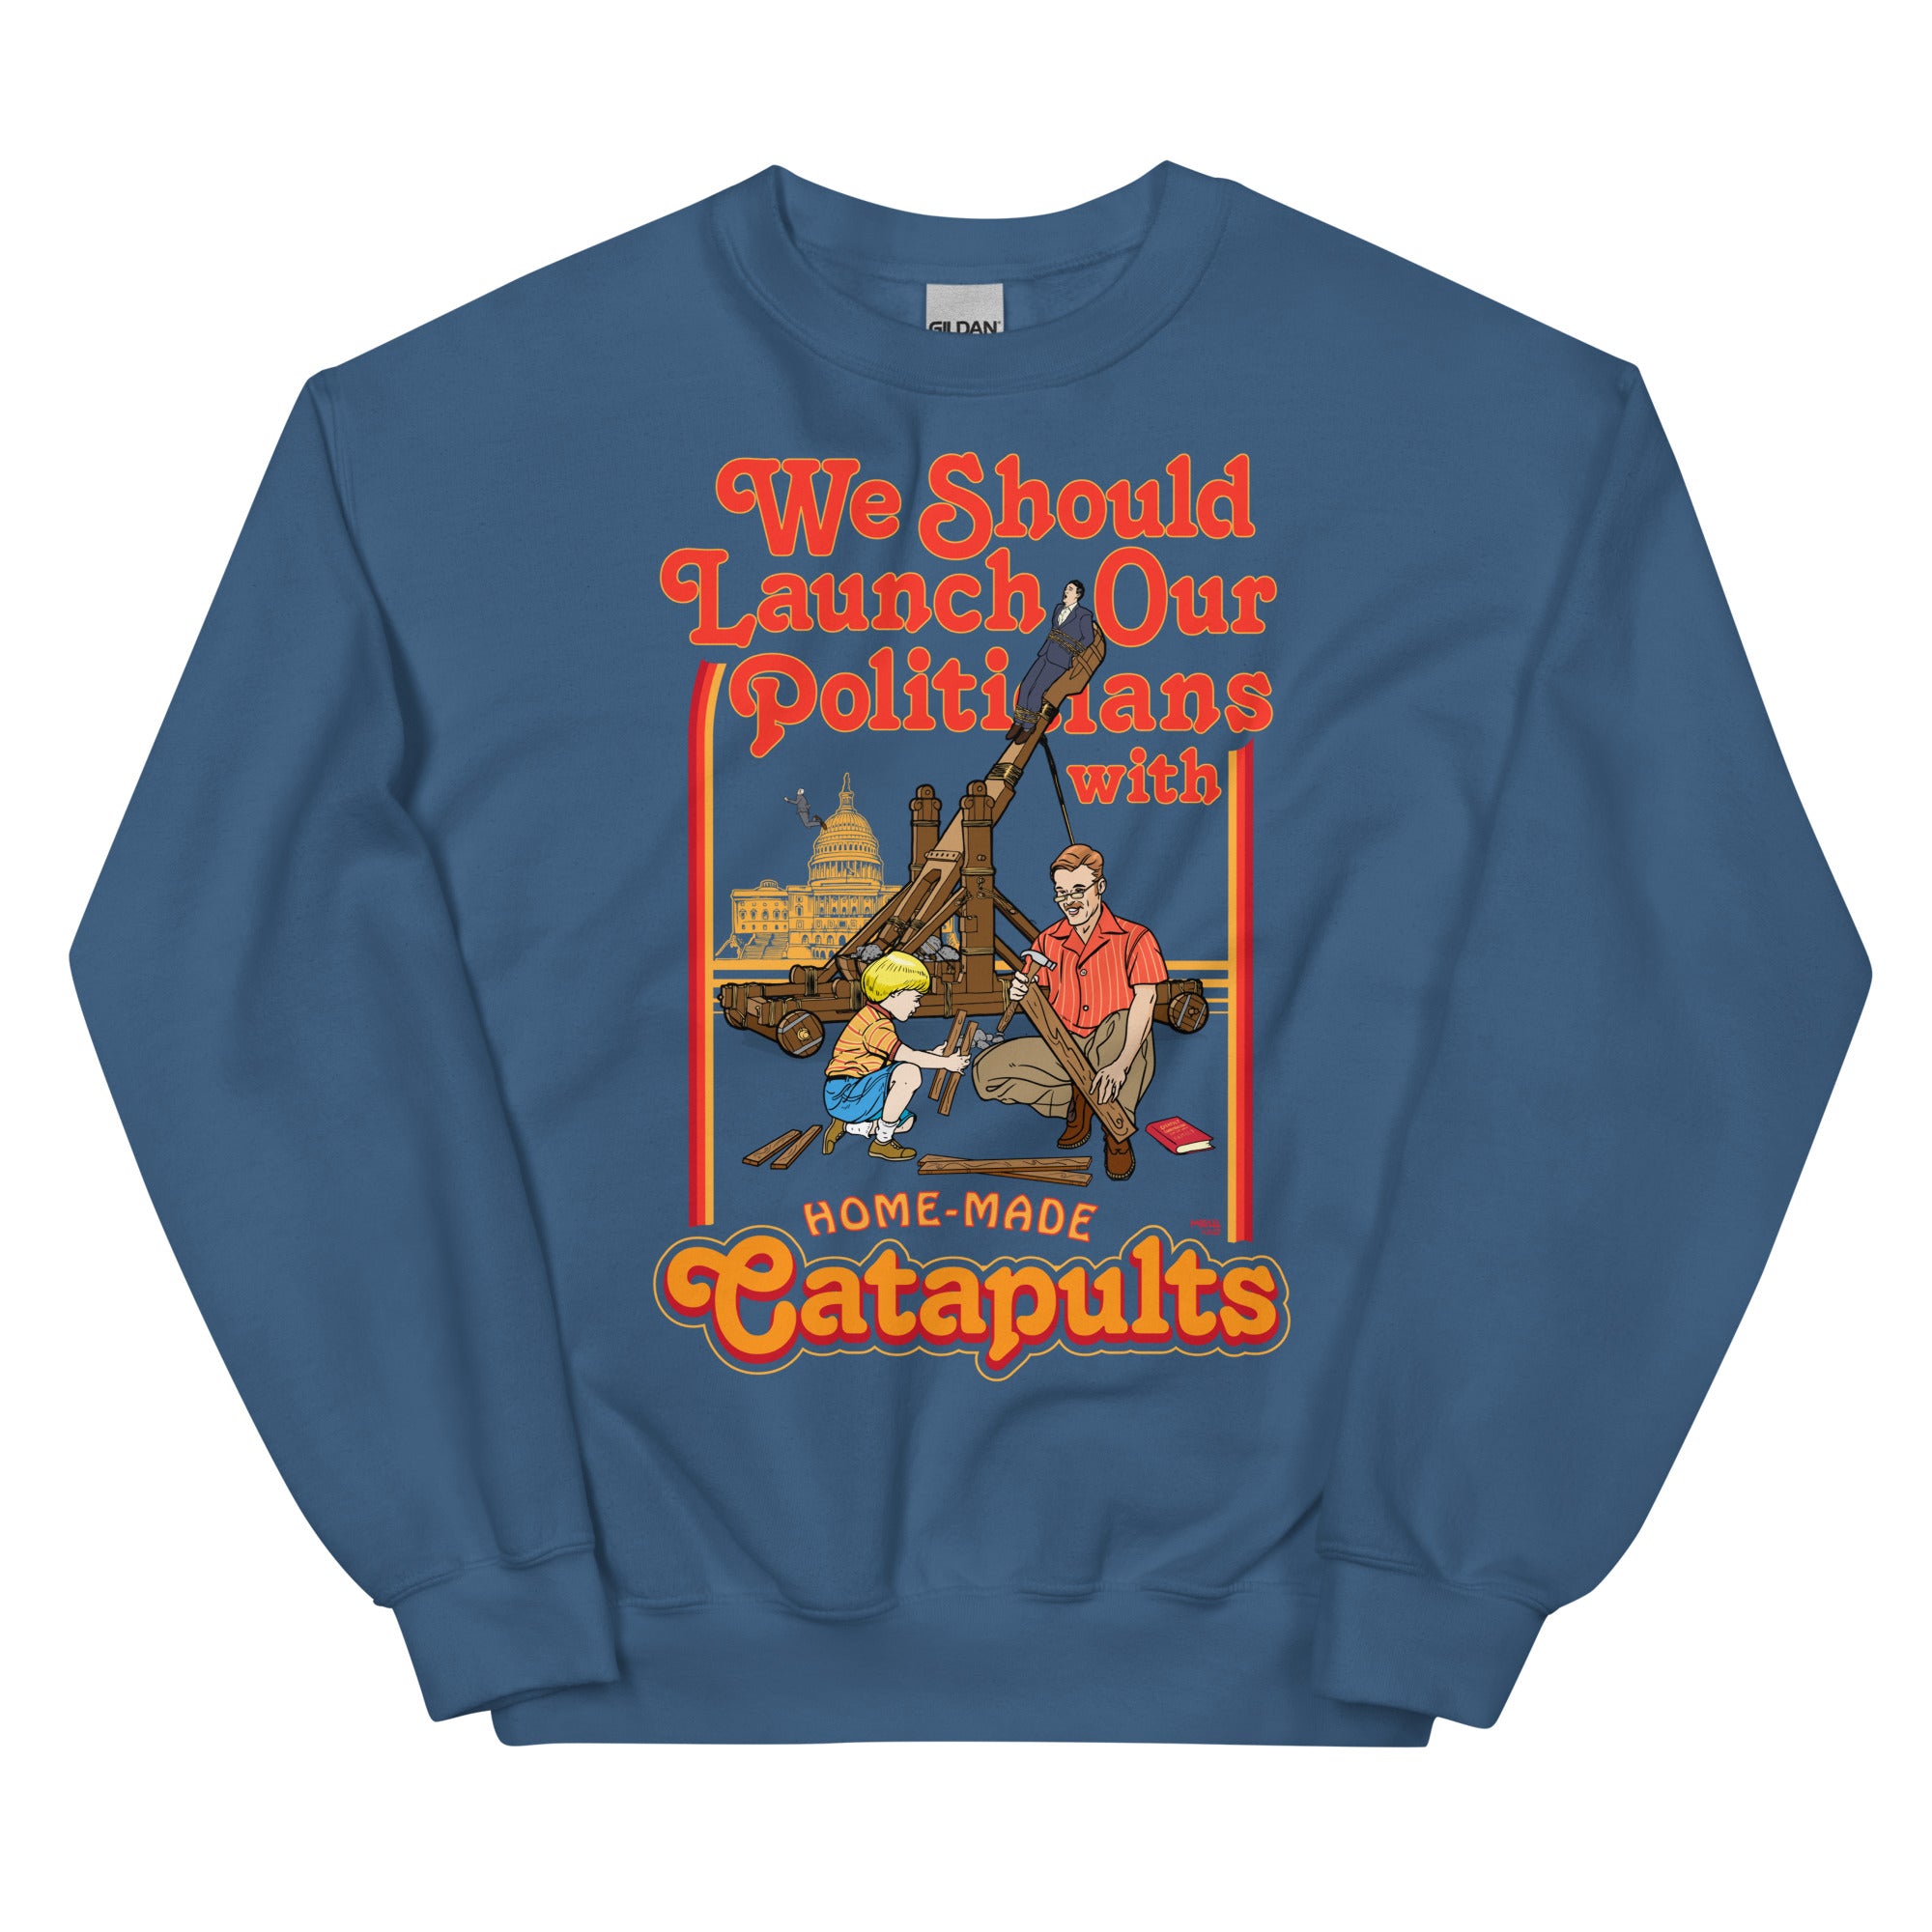 We Should Launch Our Politicians with Homemade Catapults Crewneck Sweatshirt